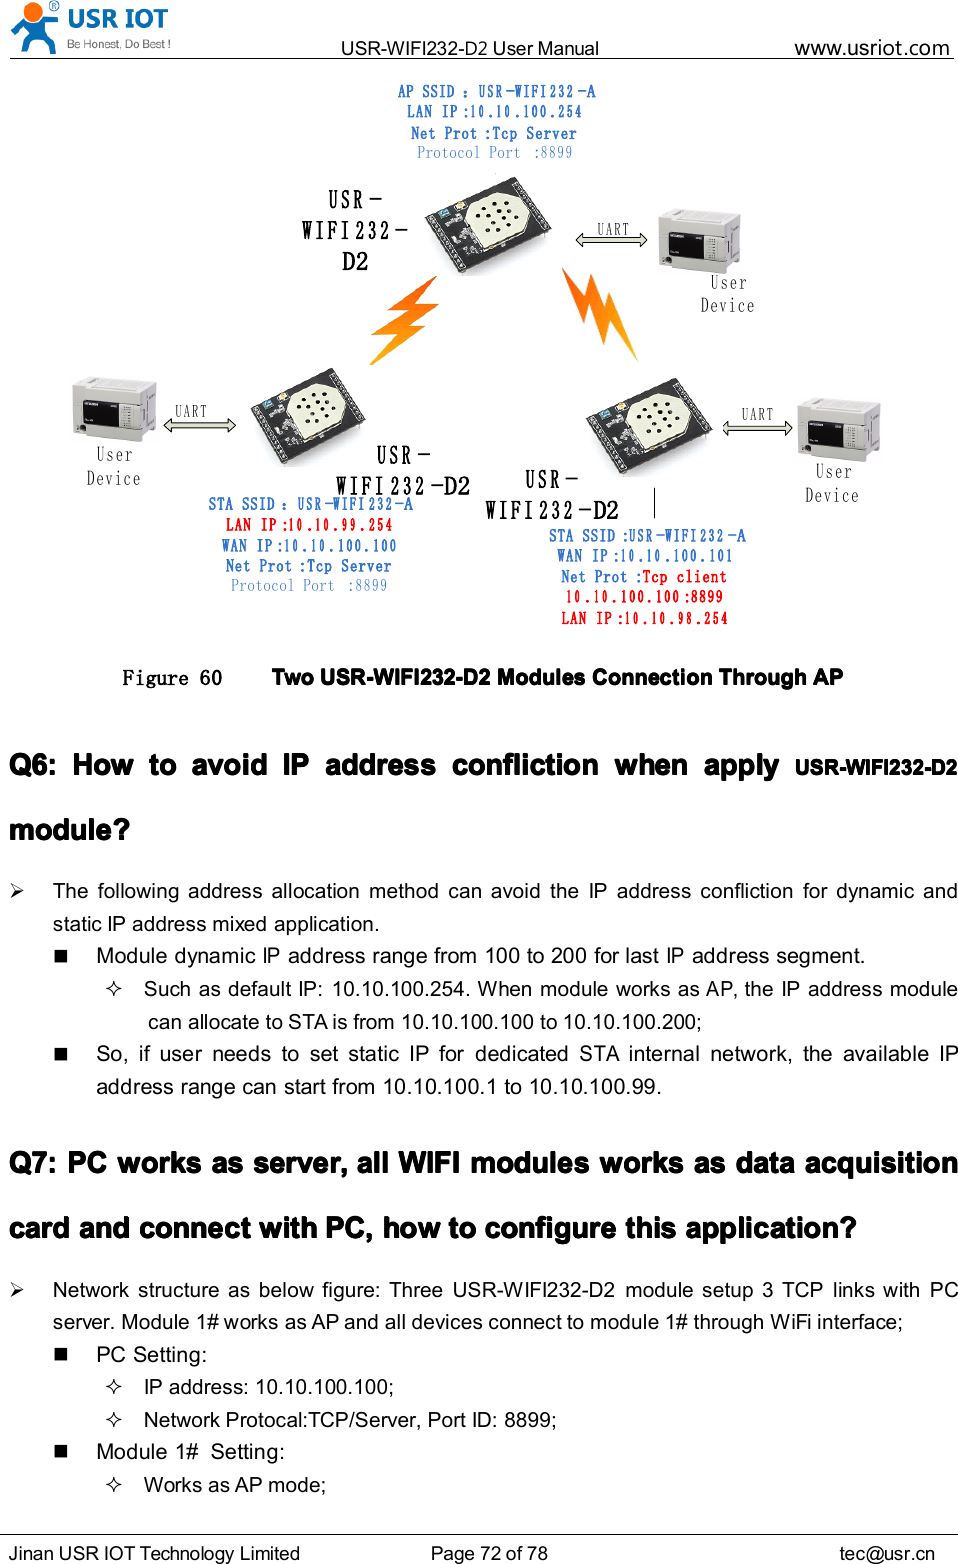 USR-WIFI232- D2 User Manual www.usr iot .comJinan USR IOT Technology Limited Page 72 of 78 tec@usr.cnUSR-WIFI232-D2User DeviceUARTUSR-WIFI232-D 2UARTUSR-WIFI232- D 2UARTSTA SSID：USR-WIFI232- ALAN IP:10.10.99.254WAN IP:10.10.100.100Net Prot:Tcp ServerProtocol Port:8899STA SSID:USR-WIFI232- AWAN IP:10.10.100.101Net Prot:Tcp client10.10.100.100:8899LAN IP:10.10.98.254AP SSID：USR-WIFI232- ALAN IP:10.10.100.254Net Prot:Tcp ServerProtocol Port:8899User DeviceUser DeviceFigure 60 TwoTwoTwoTwo USR-WIFI232-D2USR-WIFI232-D2USR-WIFI232-D2USR-WIFI232-D2 ModulesModulesModulesModules ConnectionConnectionConnectionConnection ThroughThroughThroughThrough APAPAPAPQ6:Q6:Q6:Q6: HowHowHowHow totototo avoidavoidavoidavoid IPIPIPIP addressaddressaddressaddress conflictionconflictionconflictionconfliction whenwhenwhenwhen applyapplyapplyapply USR-WIFI232-D2USR-WIFI232-D2USR-WIFI232-D2USR-WIFI232-D2module?module?module?module?The following address allocation method can avoid the IP address confliction for dynamic andstatic IP address mixed application.M odule dynamicIPaddress range from 100 to 200 for lastIPaddress segment.Such as default IP: 10.10.100.254. When module works asAP,the IP address modulecan allocate to STA is from 10.10.100.100 to 10.10.100.200;So, if user needs to set static IP for dedicatedSTAinternal network, the available IPaddress range can start from 10.10.100.1 to 10.10.100.99.Q7:Q7:Q7:Q7: PCPCPCPC worksworksworksworks asasasas server,server,server,server, allallallall WIFIWIFIWIFIWIFI modulesmodulesmodulesmodules worksworksworksworks asasasas datadatadatadata acquisitionacquisitionacquisitionacquisitioncardcardcardcard andandandand connectconnectconnectconnect withwithwithwith PC,PC,PC,PC, howhowhowhow totototo configureconfigureconfigureconfigure thisthisthisthis application?application?application?application?Network structure as below figure: Three USR-WIFI232-D2 module setup 3 TCP links with PCserver. Module 1# works as AP and all devices connect to module 1# through WiFi interface;PC Setting:IP address: 10.10.100.100;Network Protocal:TCP/Server, Port ID: 8899;Module 1# Setting:Works as AP mode;